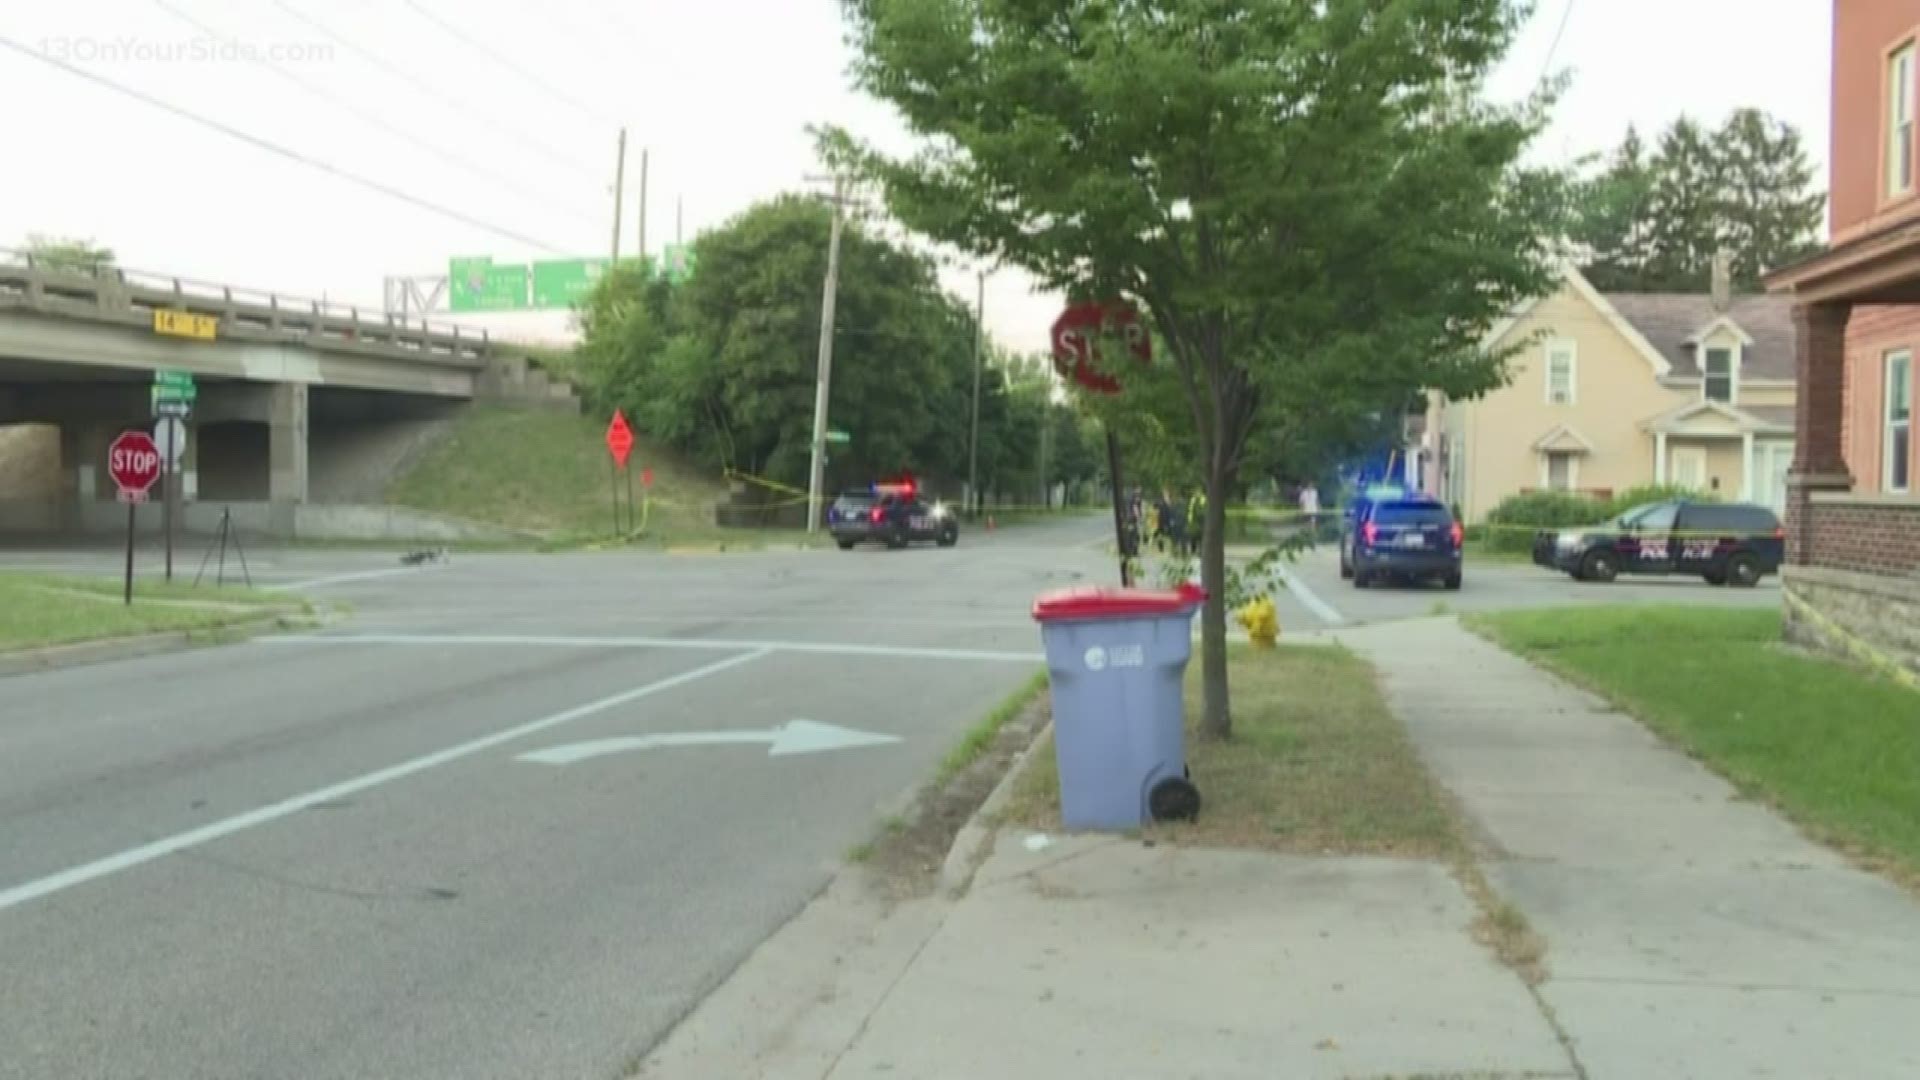 A bicyclist is dead after being hit by a semi-truck in Grand Rapids early Thursday morning. The family of the Grand Rapids man says he was biking home after working third-shift. He did not stop at the intersection and hit the semi.